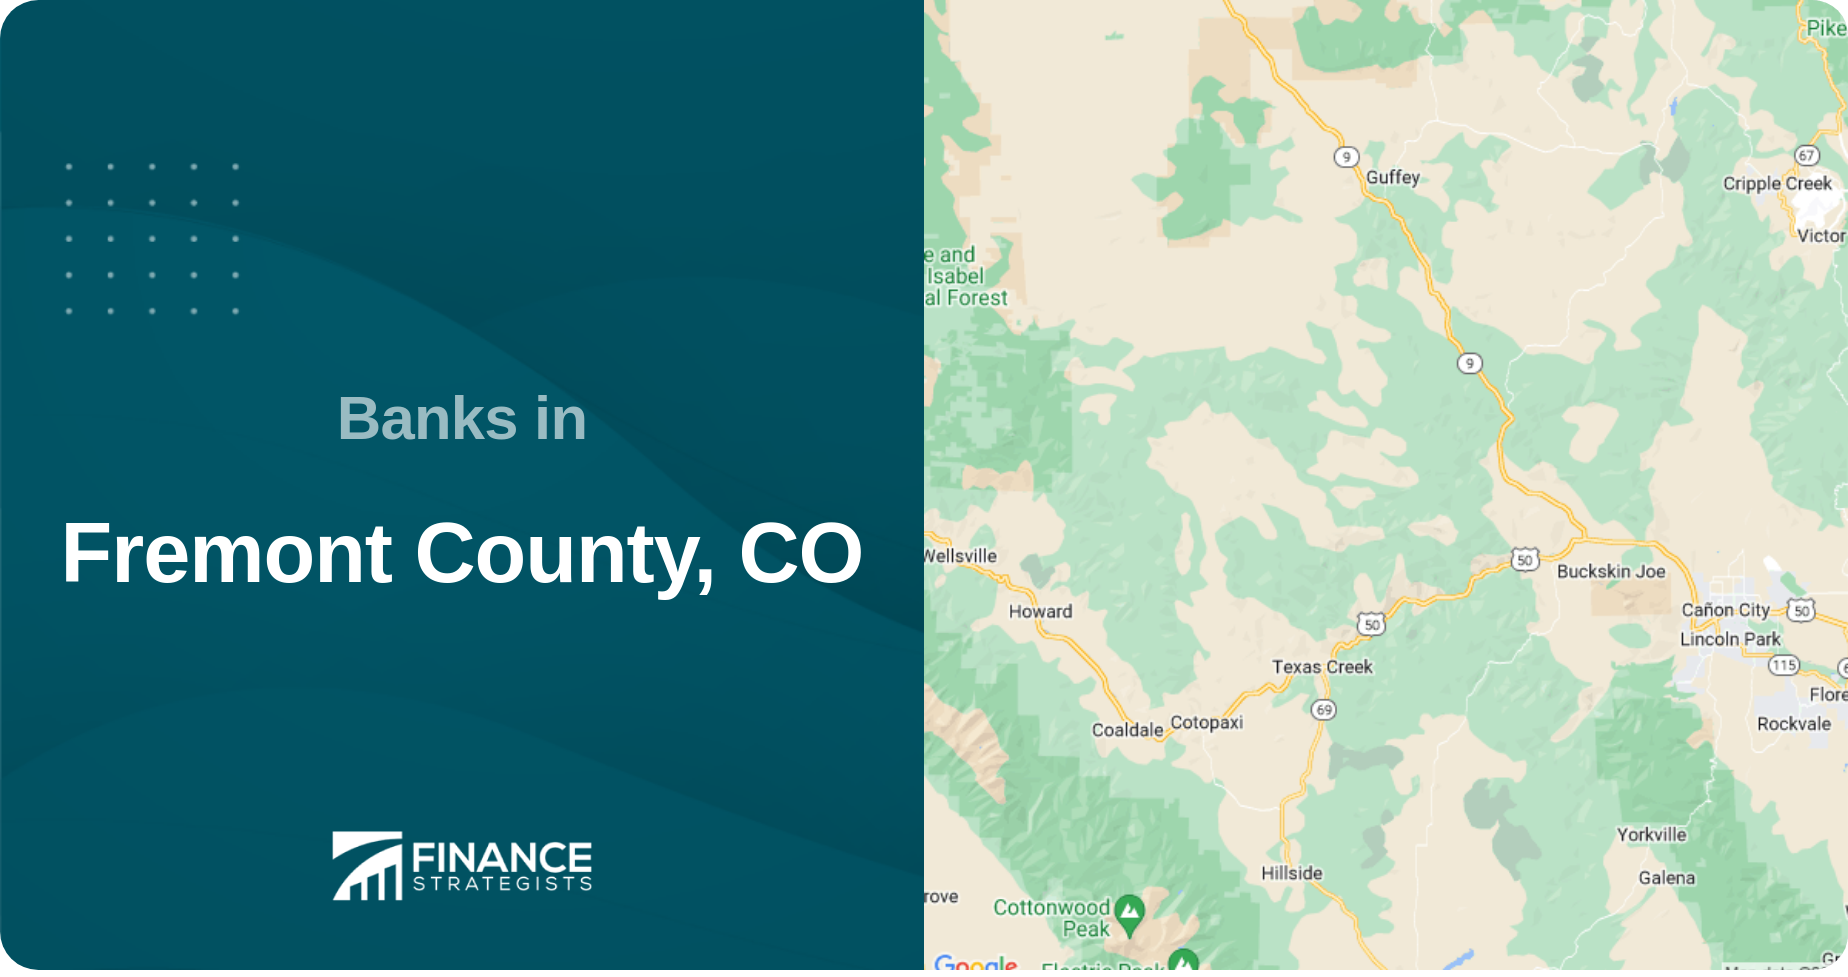 Banks in Fremont County, CO